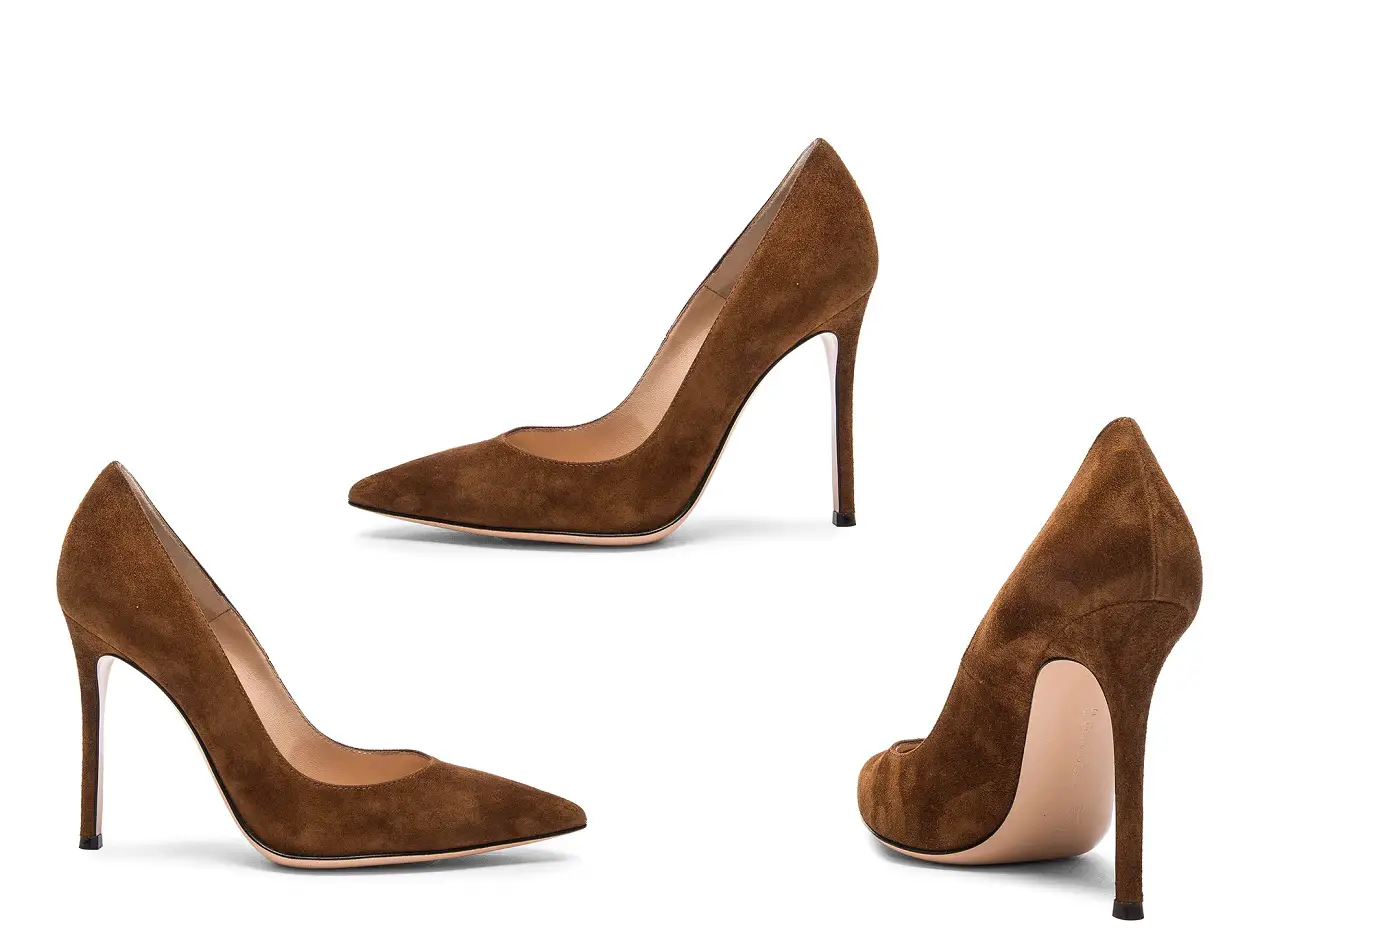 The Duchess of Cambridge wore Gianvito Rossi Suede Brown Pumps